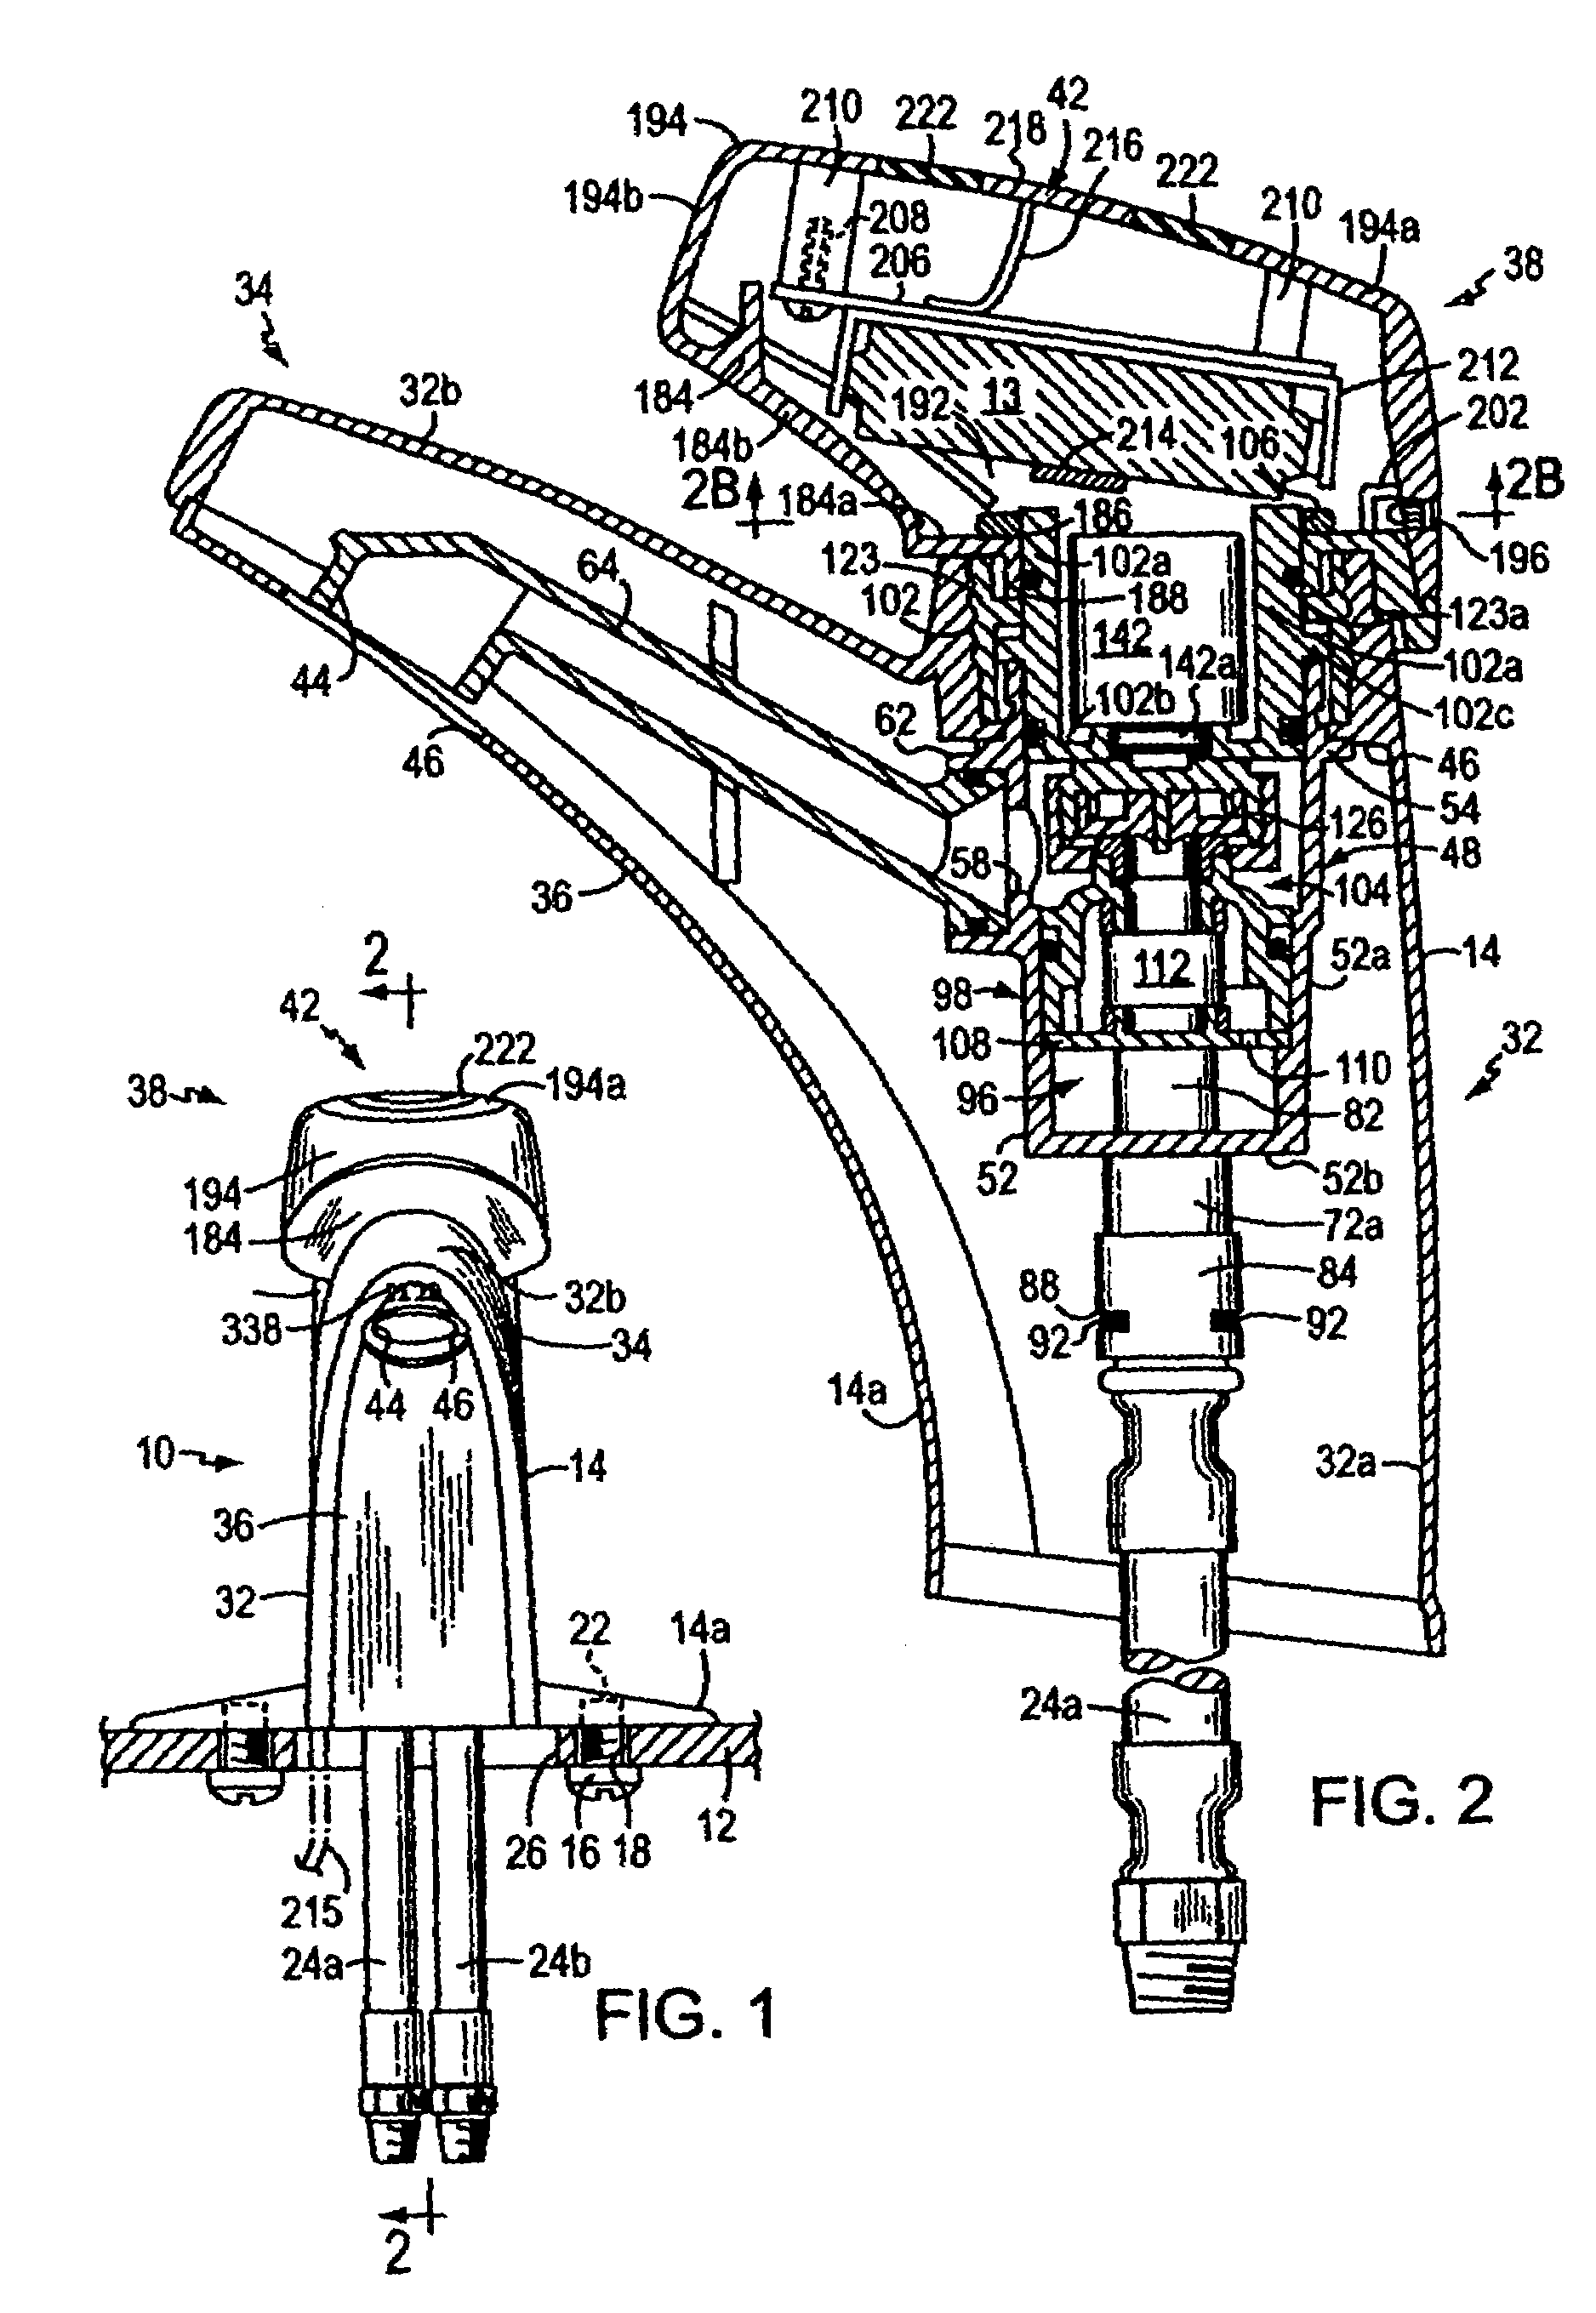 Electronic faucets for long-term operation